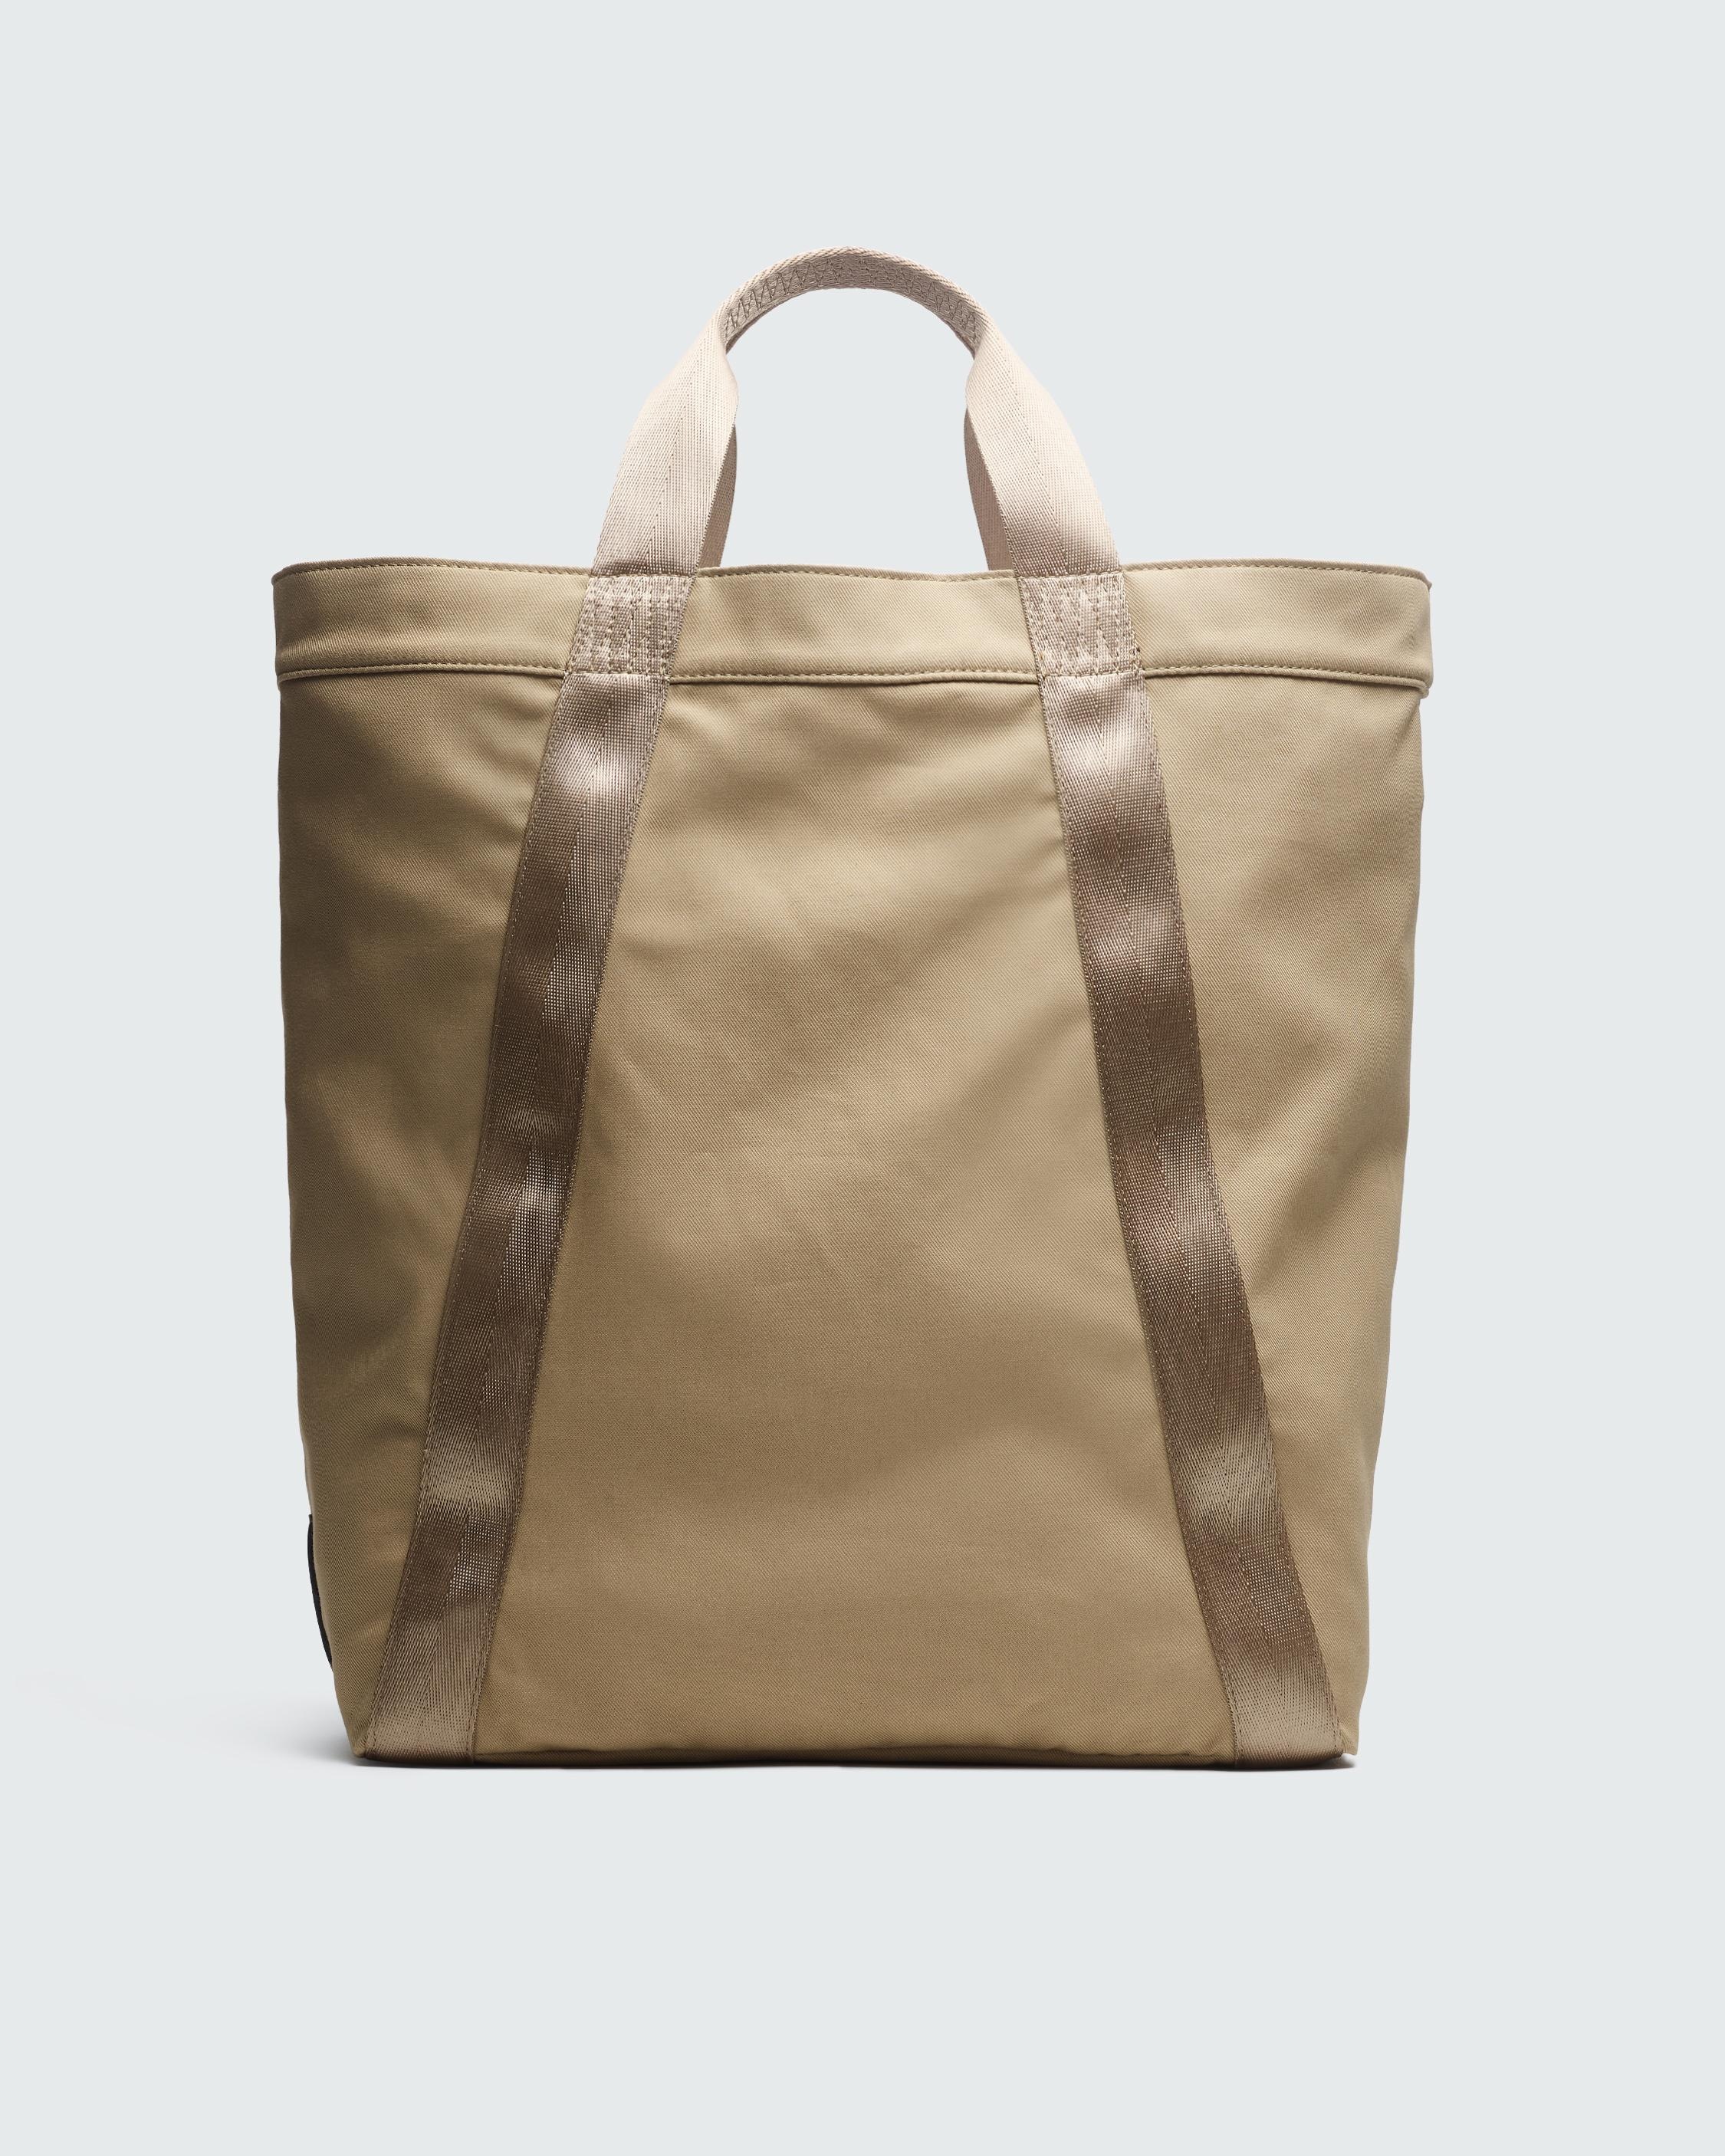 Division Tote - Cotton
Large Tote Bag - 1